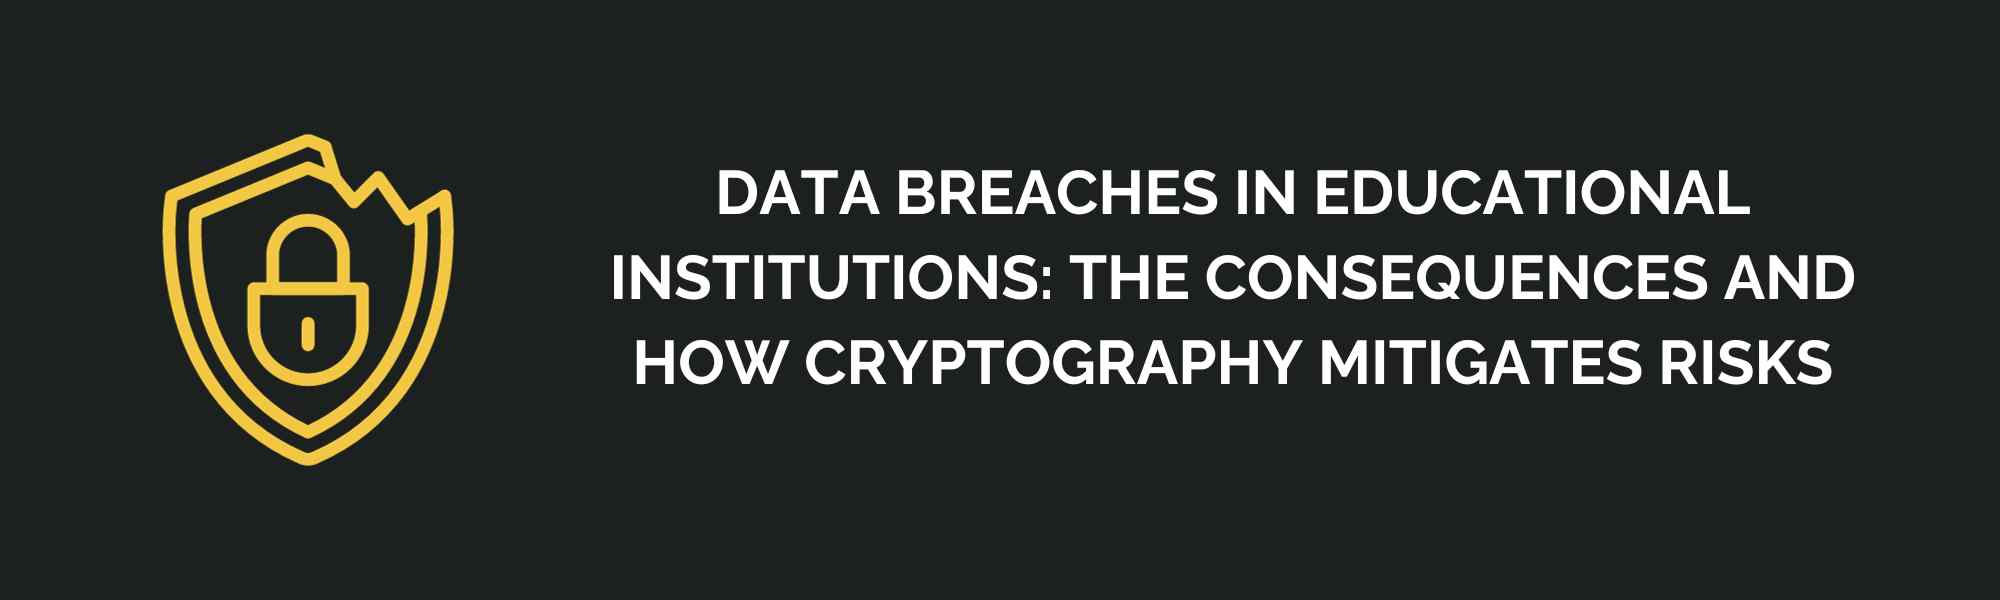 Data Breaches in Educational Institutions.